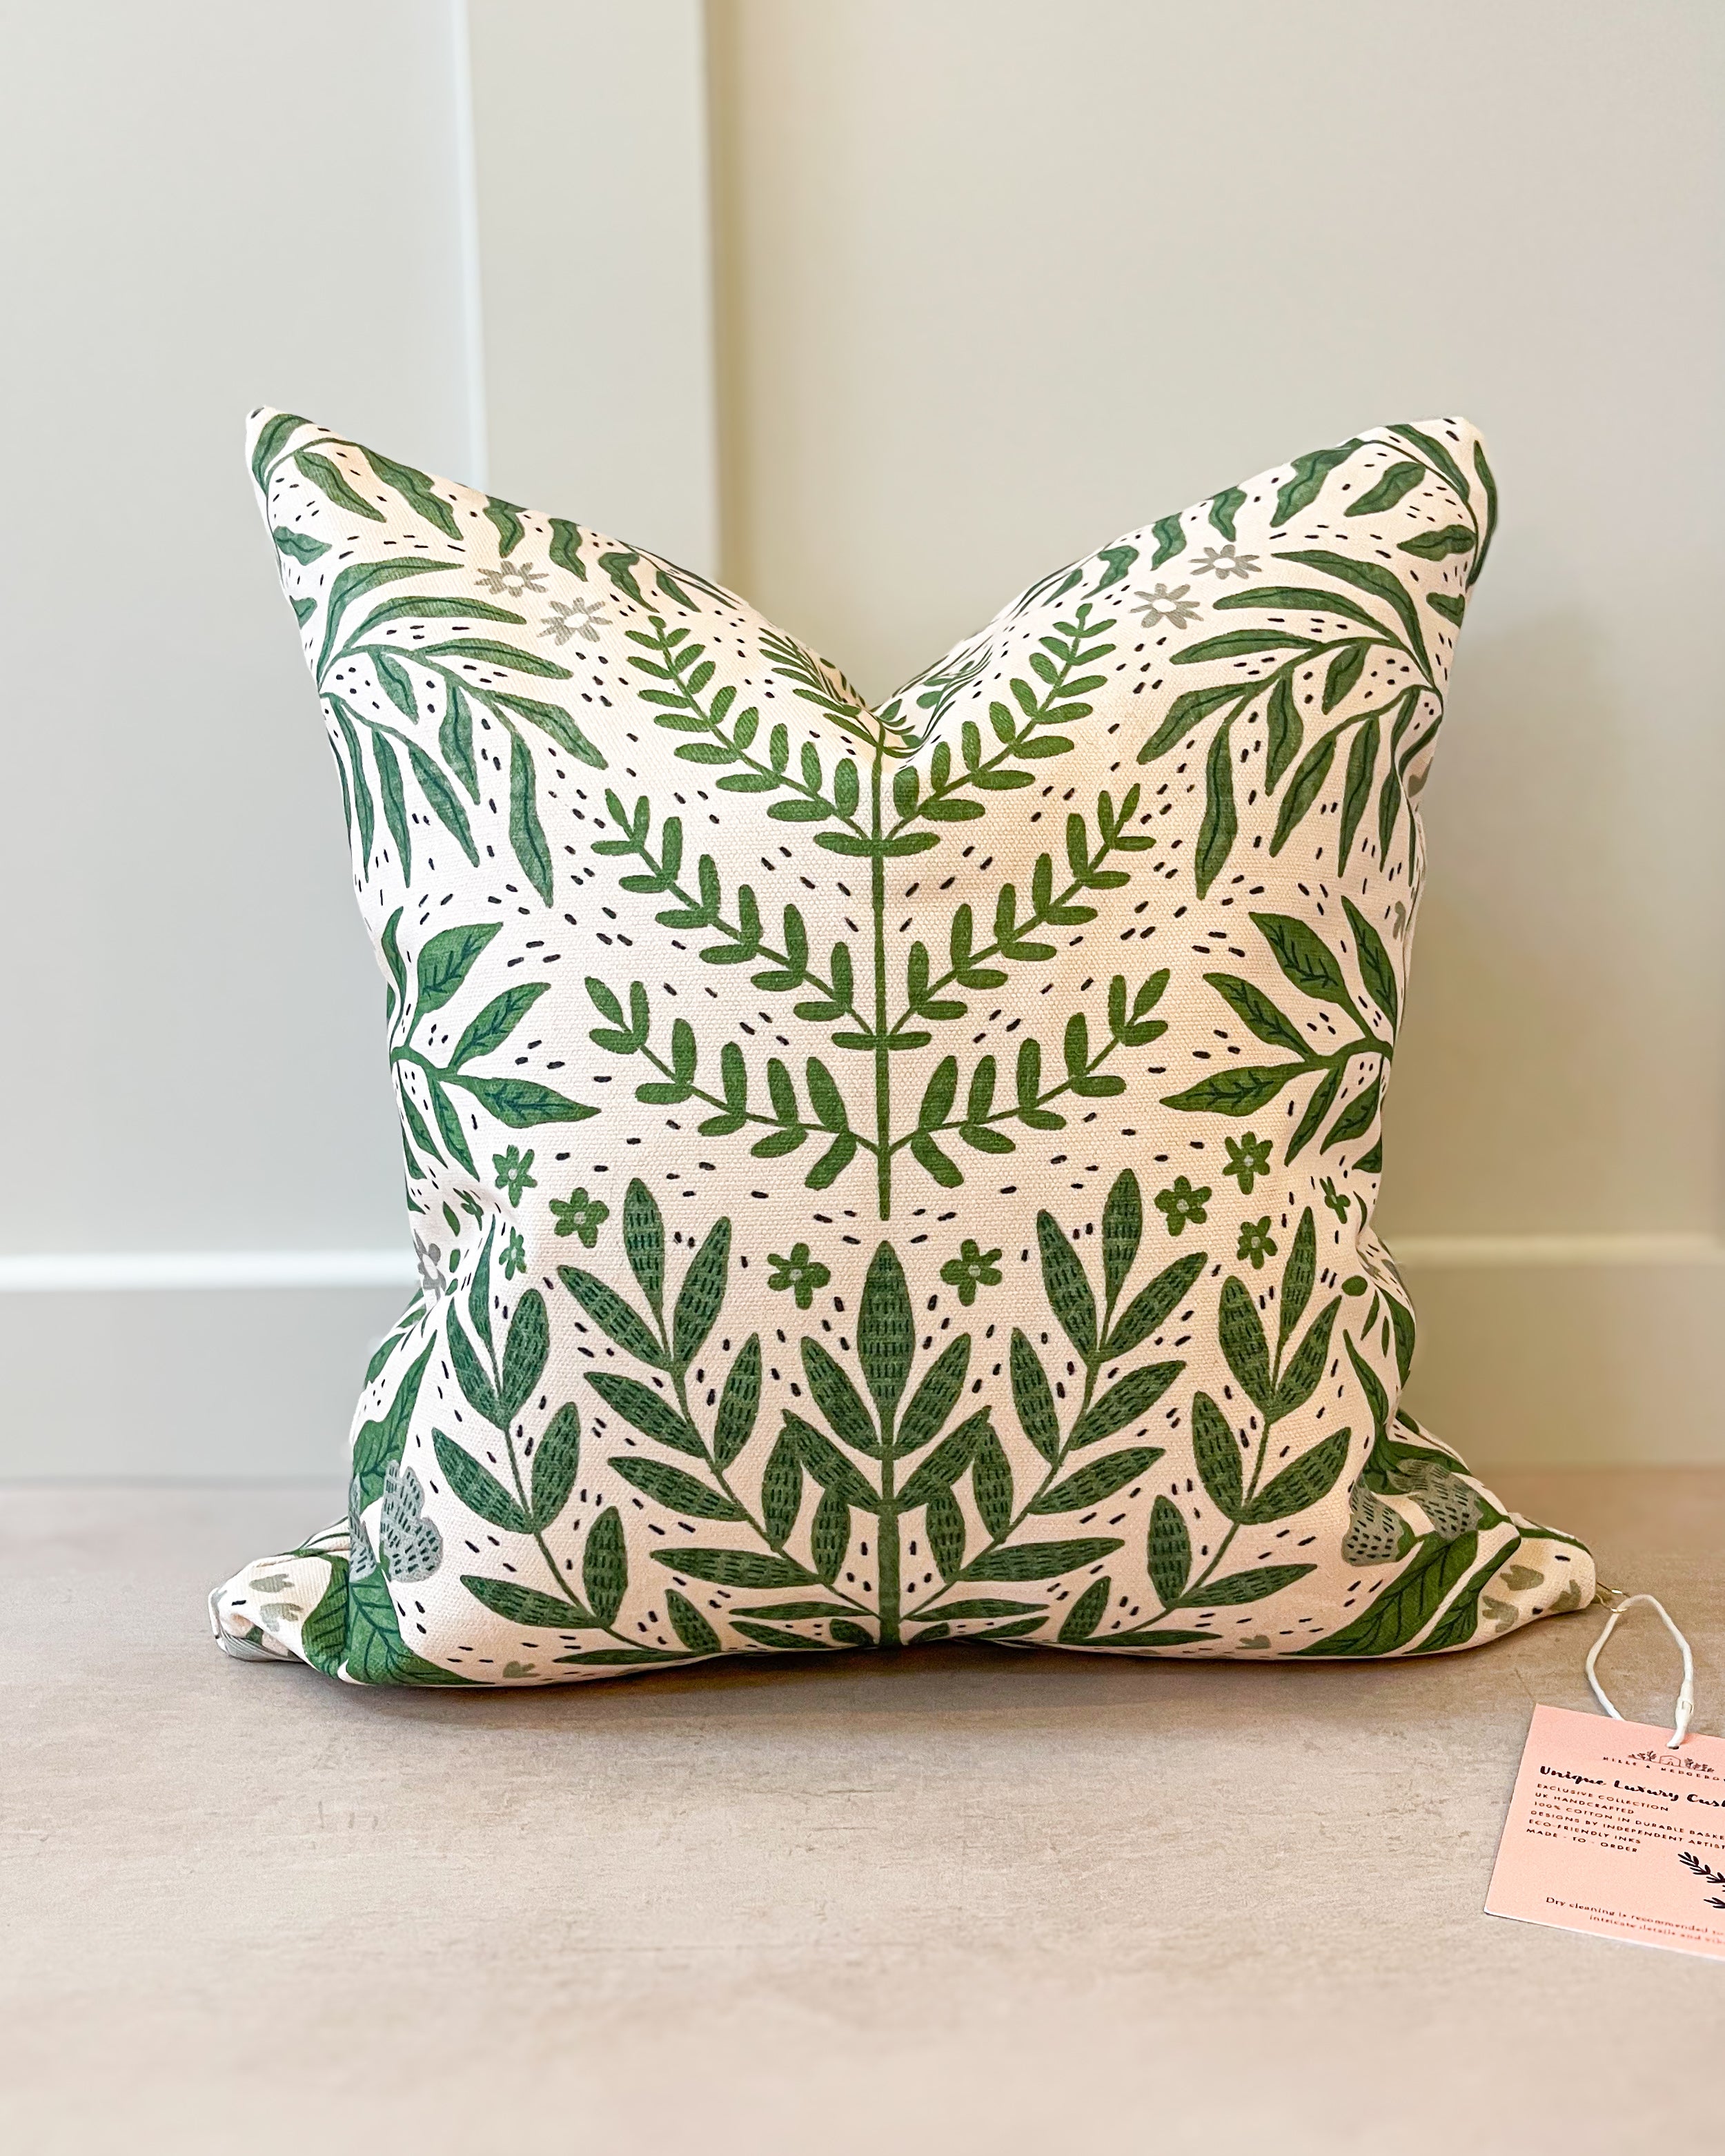 Botanical-inspired cushion with lush green and floral patterns, handmade in the UK from sustainable basketweave cotton.